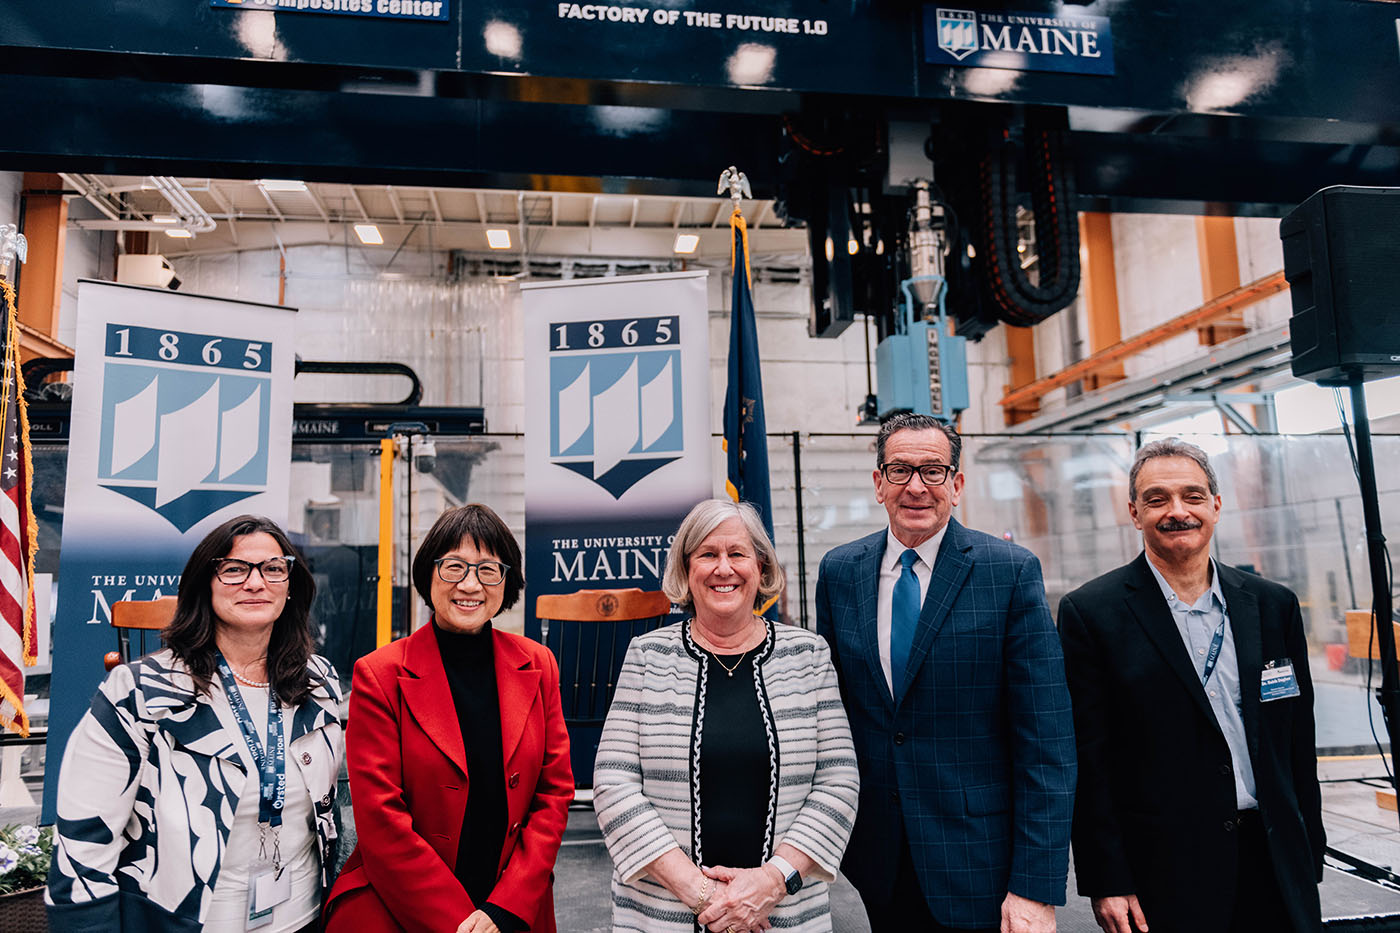 Some key leaders attended the unveiling event. From left to right: Giovanna Guidoboni, Dean, Maine College of Engineering and Computing; Heidi Shyu, Under Secretary of Defense for Research and Engineering; Joan Ferrini-Mundy, President of the University of Maine; Daniel Malloy, Chancellor of the University of Maine System; and Dr. Habib Dagher, ASCC’s Executive Director. 